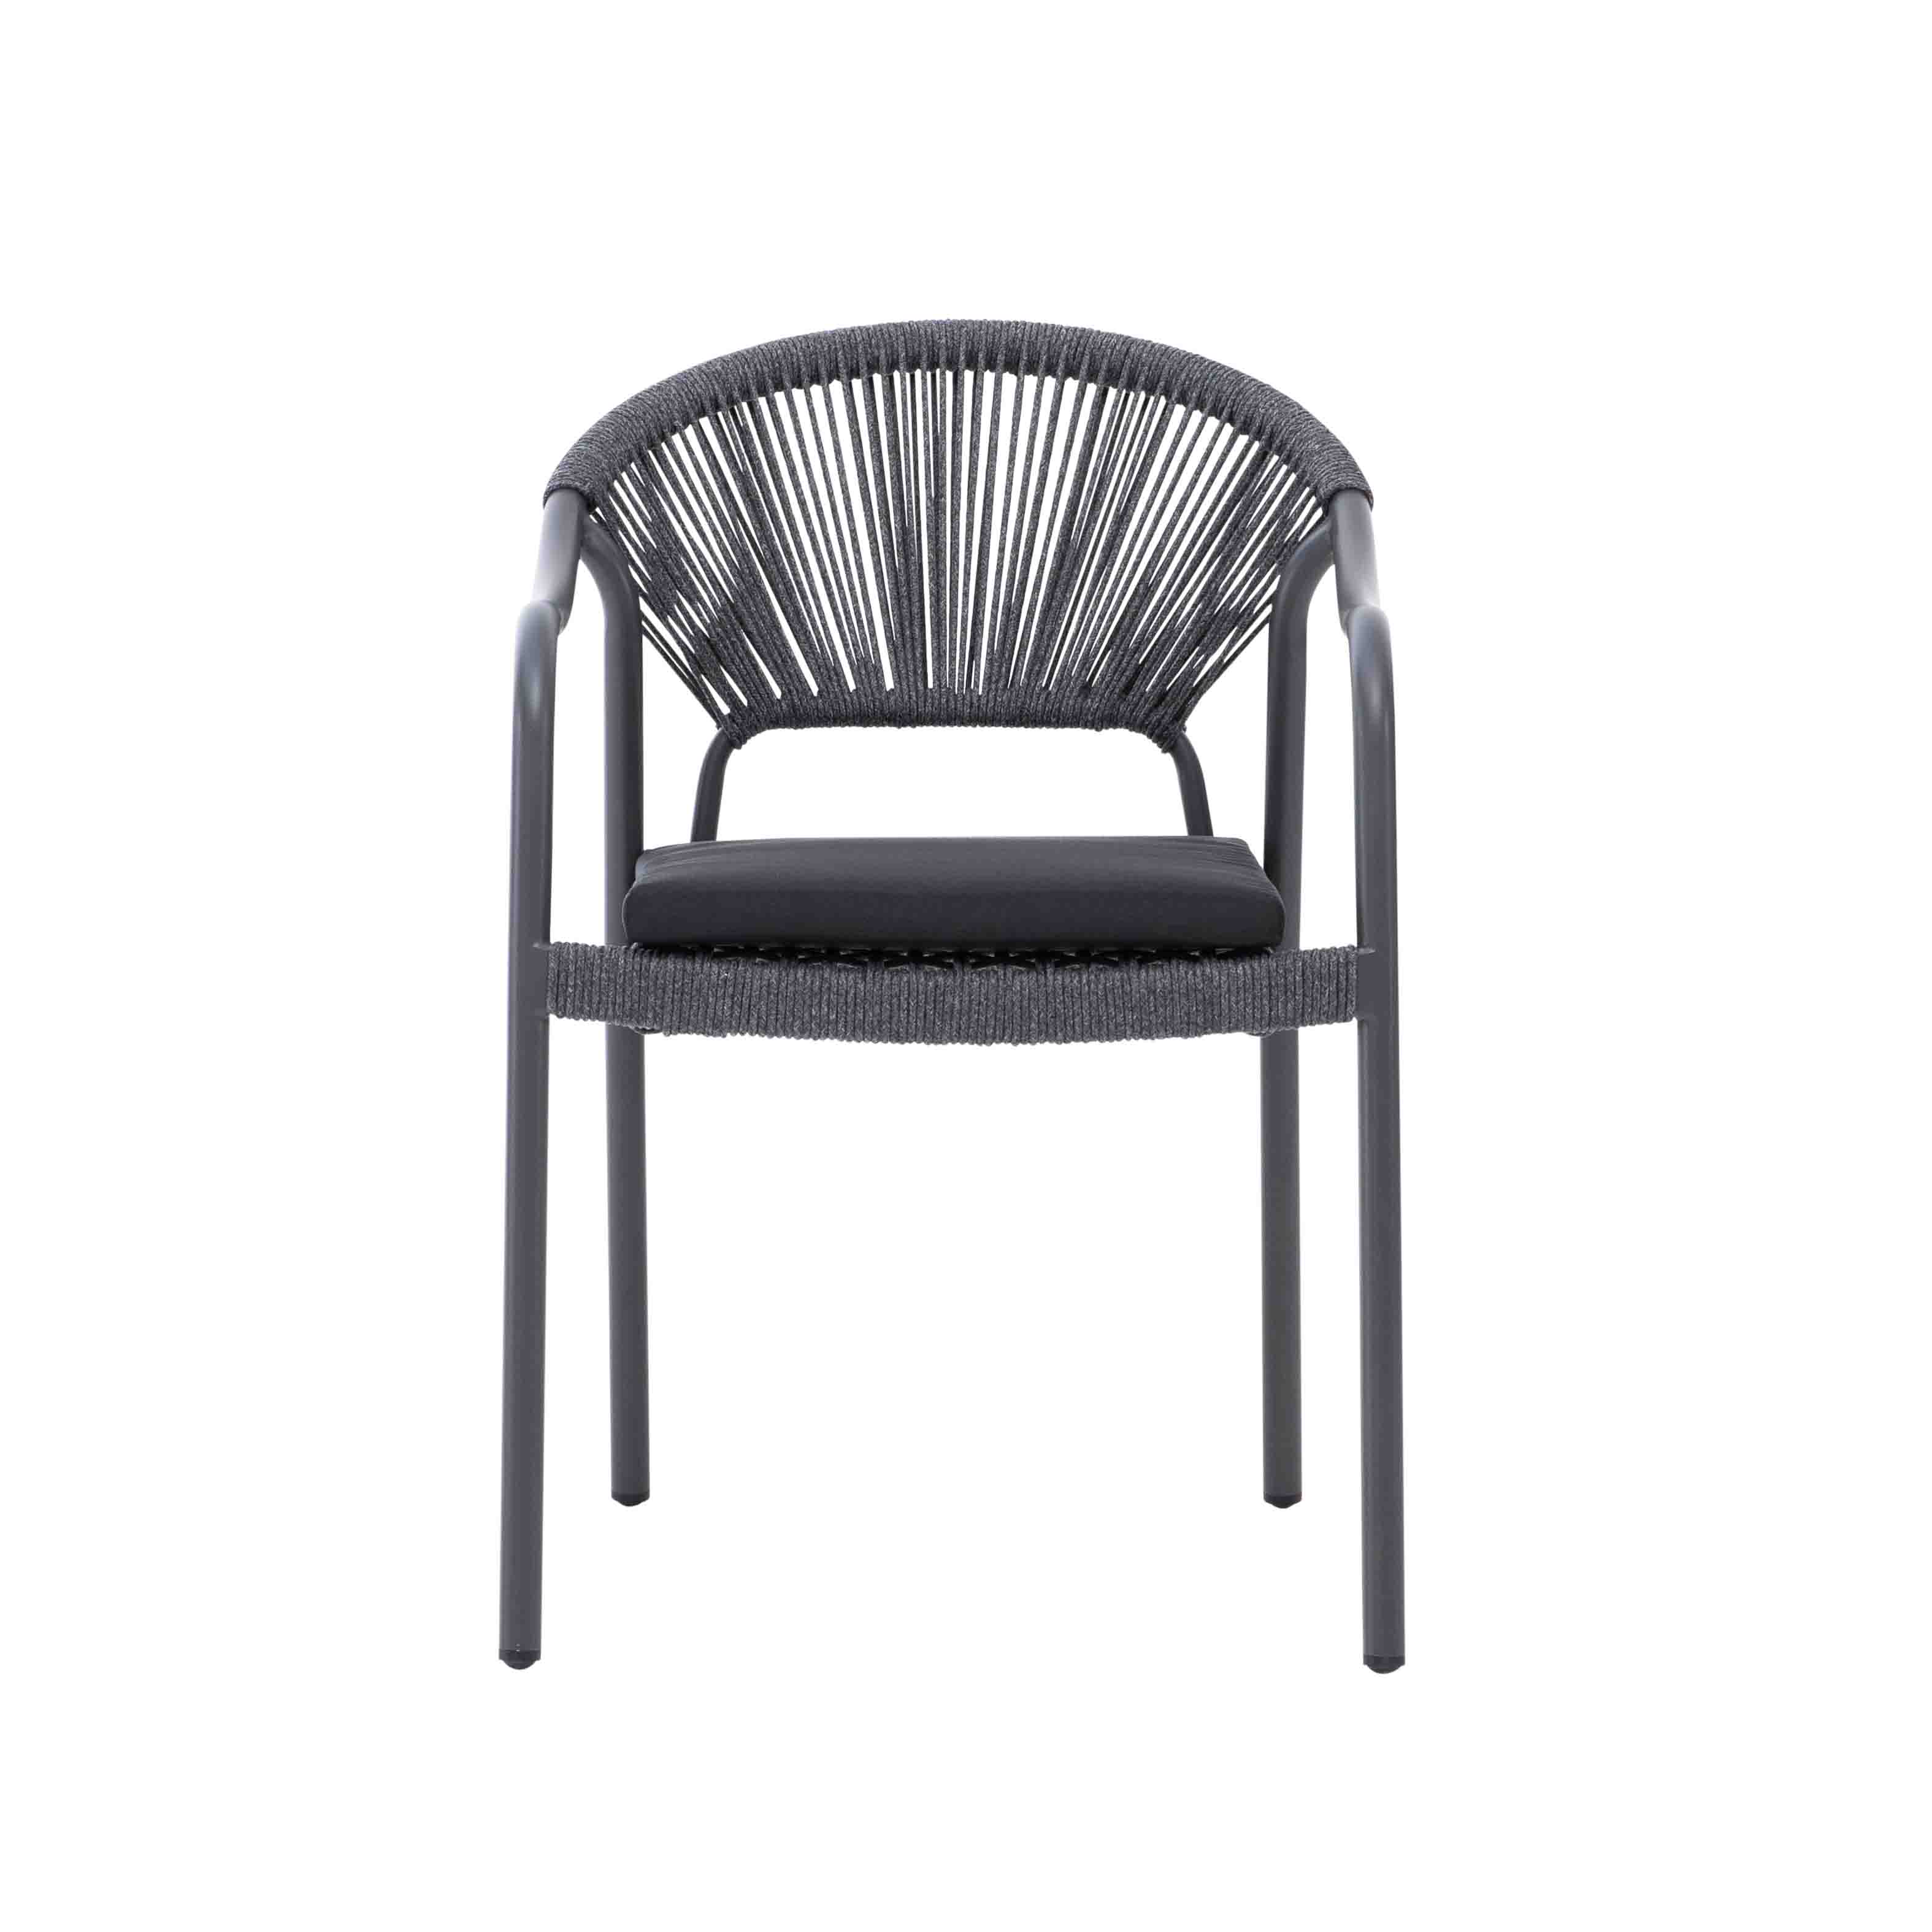 Maris rope dining chair S15